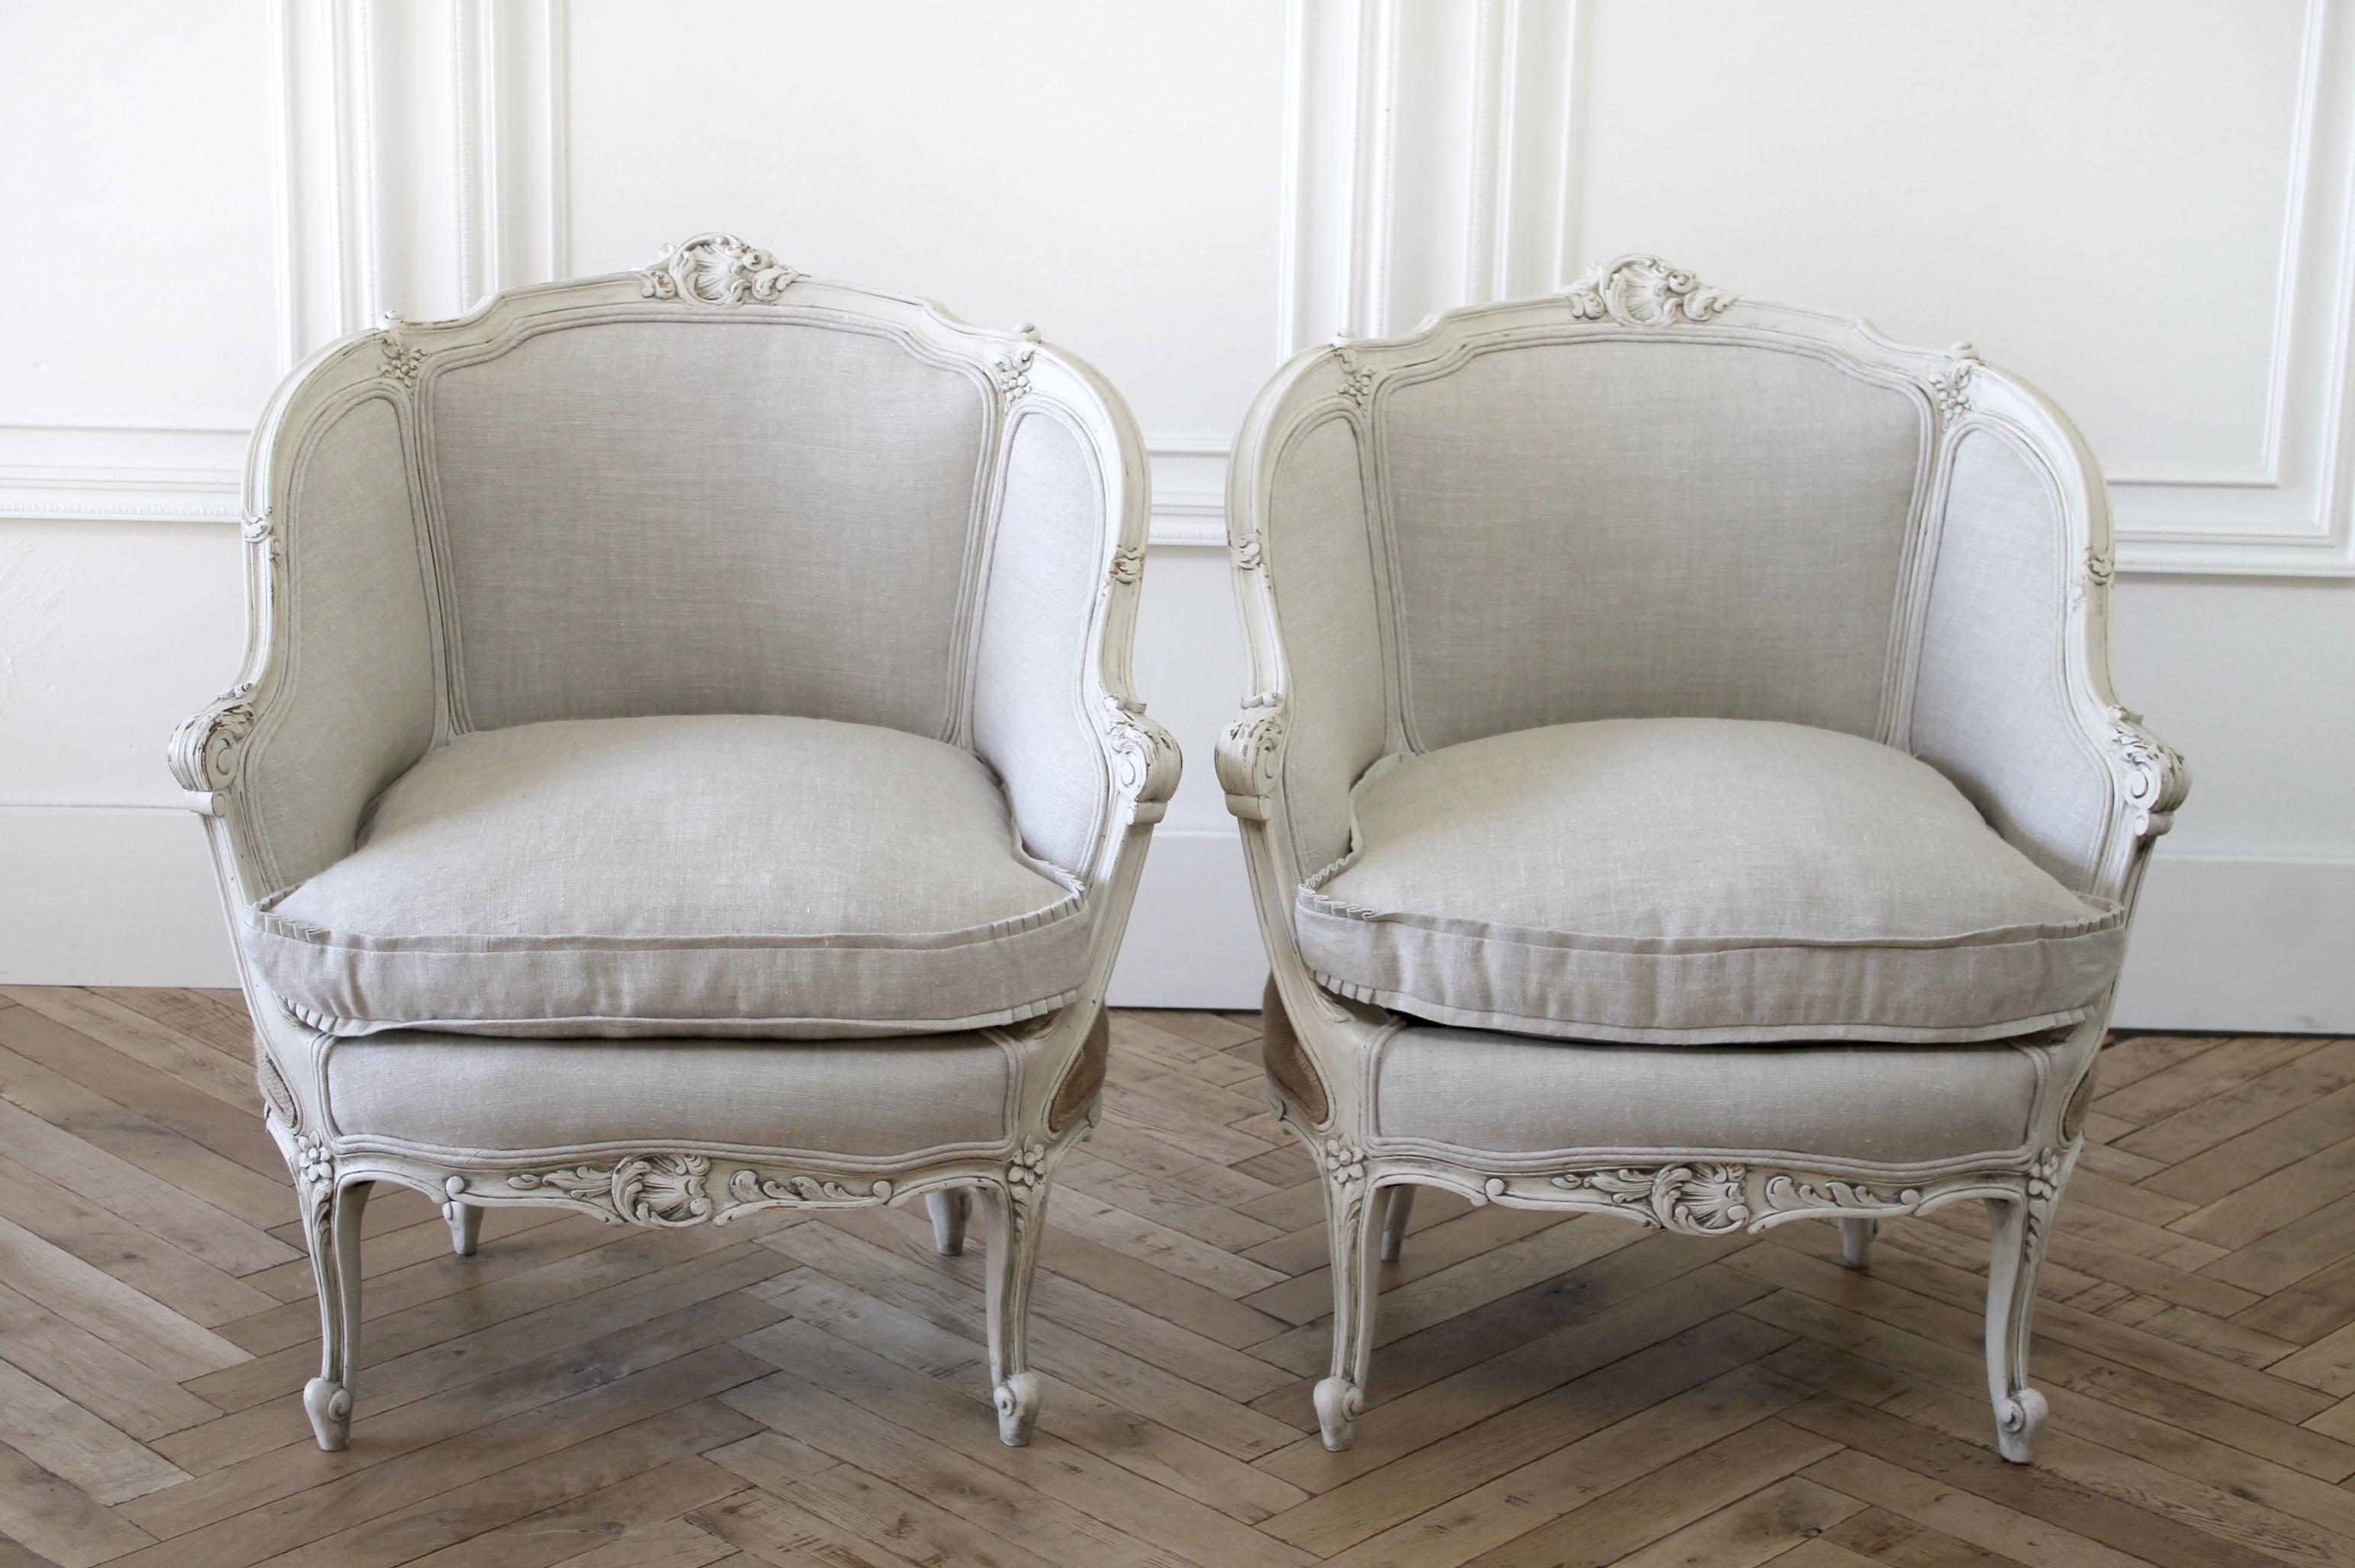 European Pair of Vintage Painted and Upholstered French Style Marquis Chairs in Linen